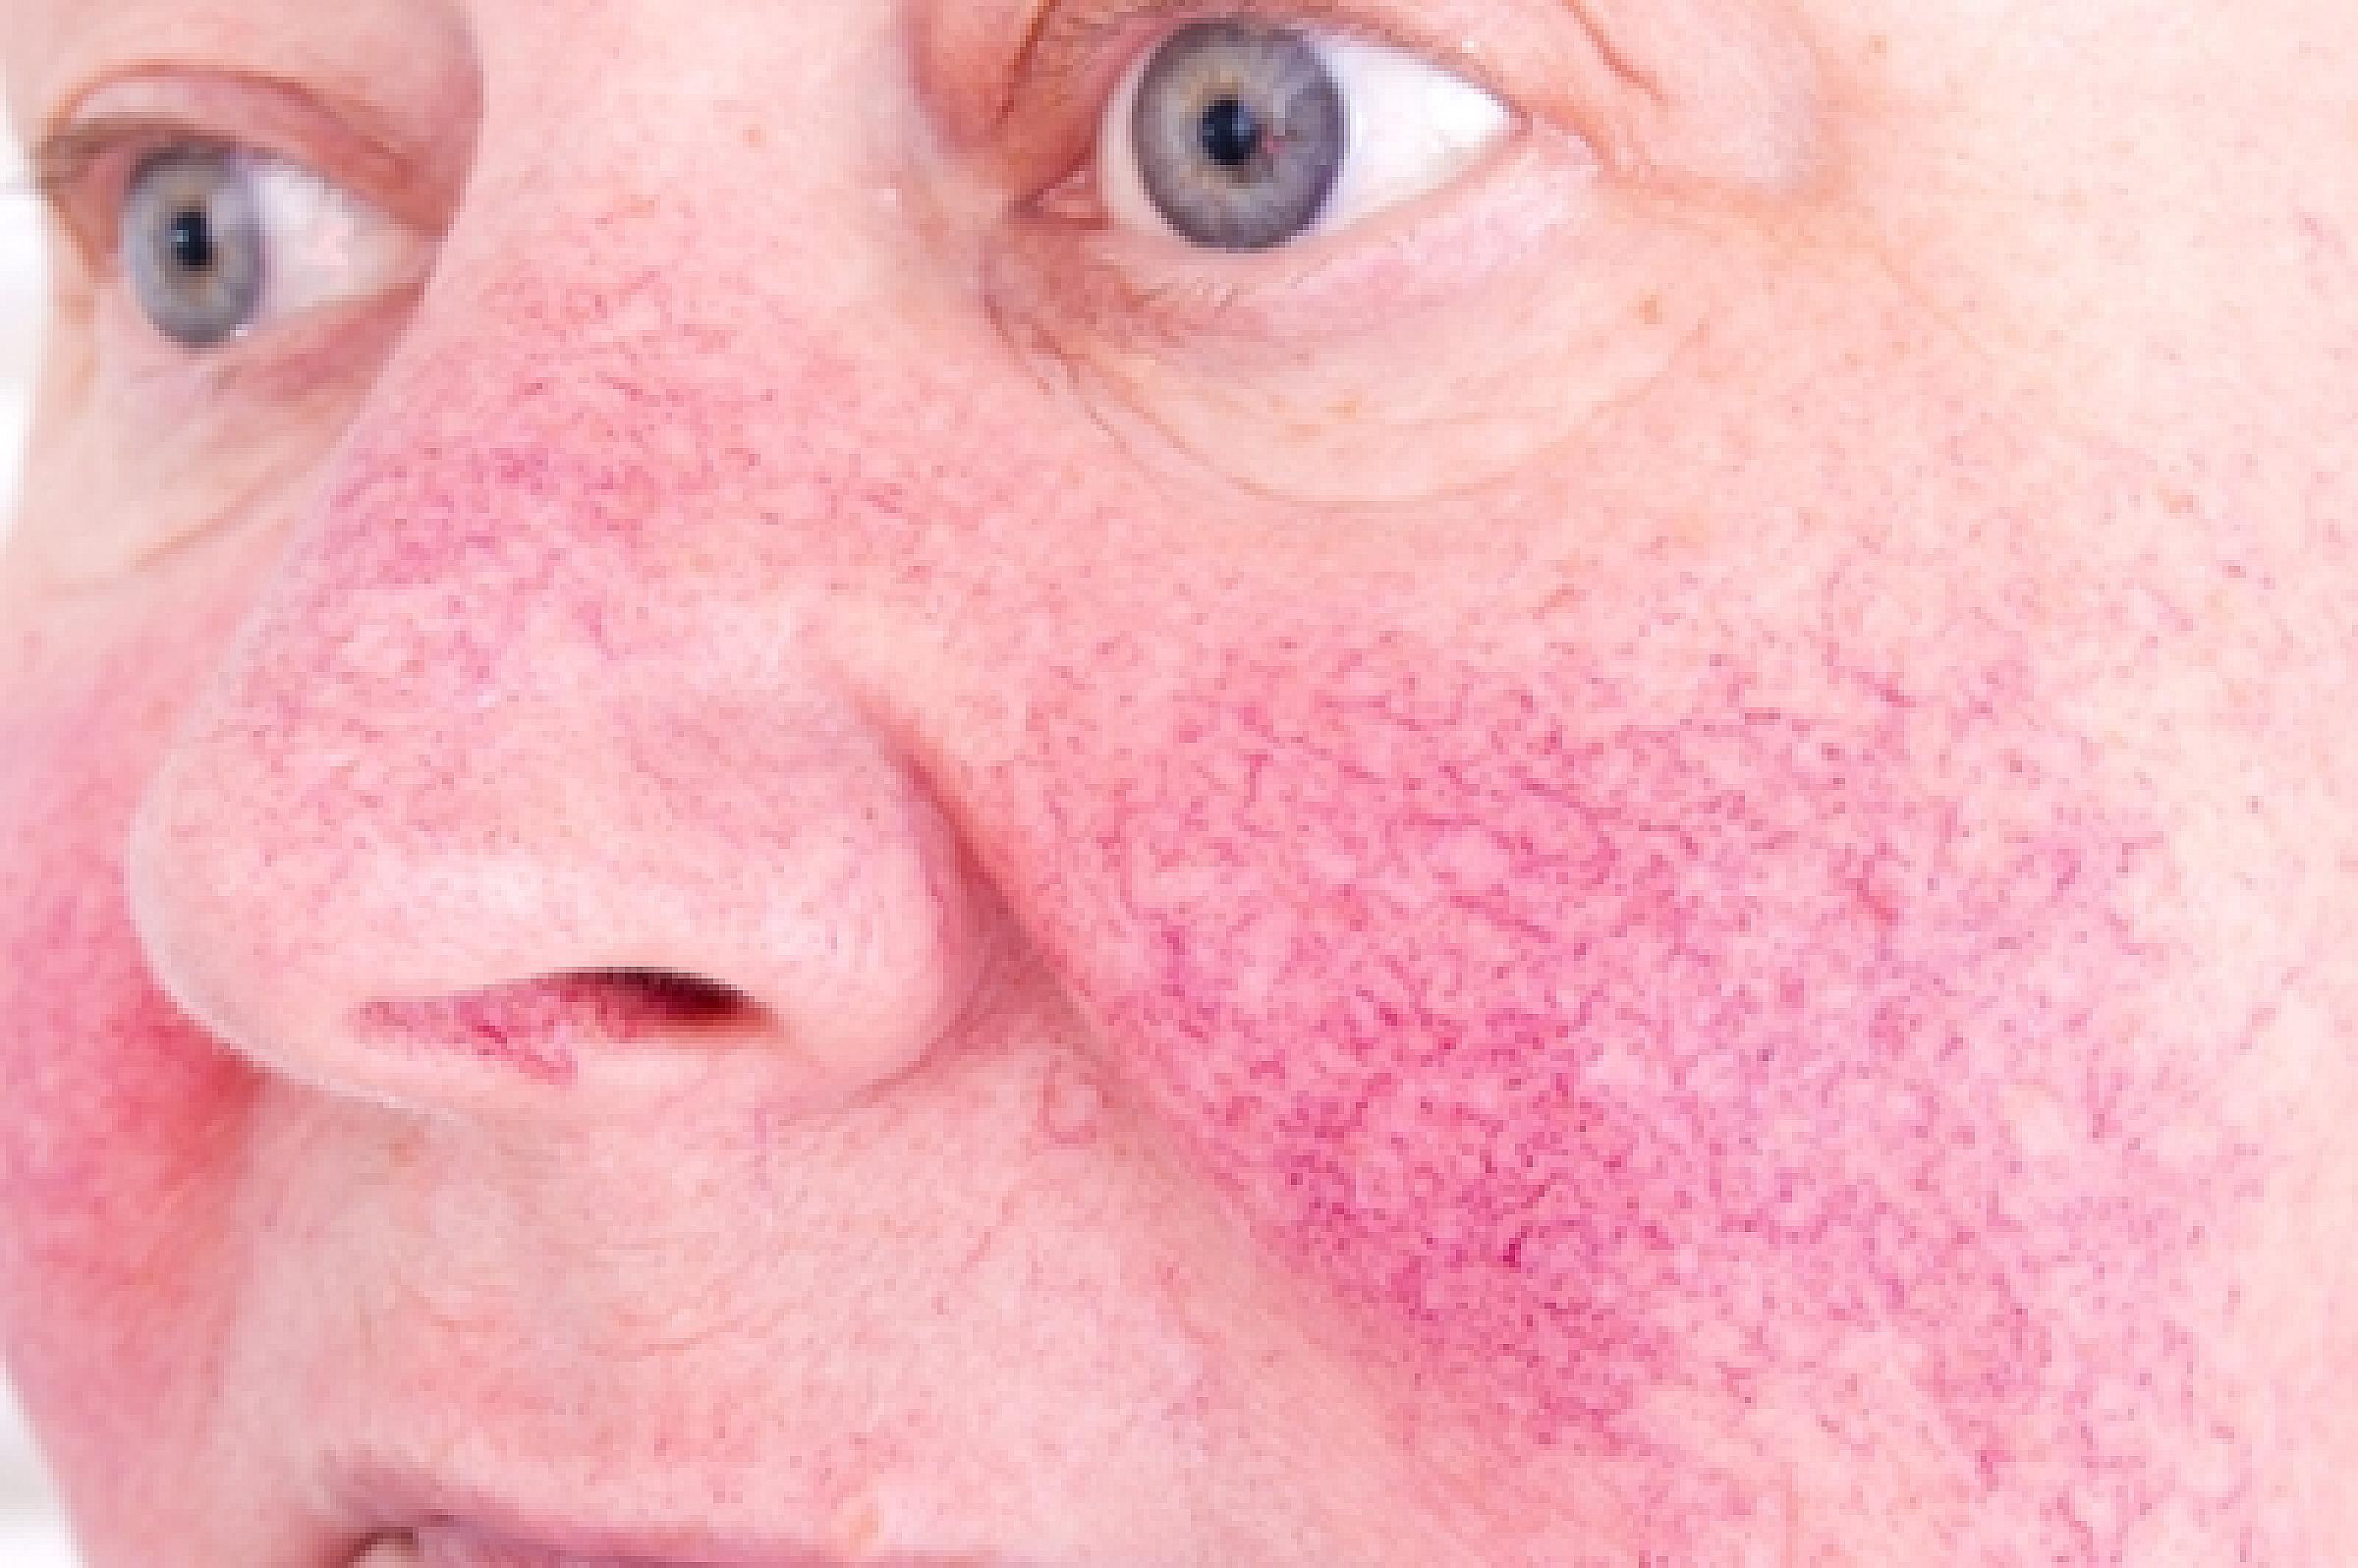 Man with rosacea